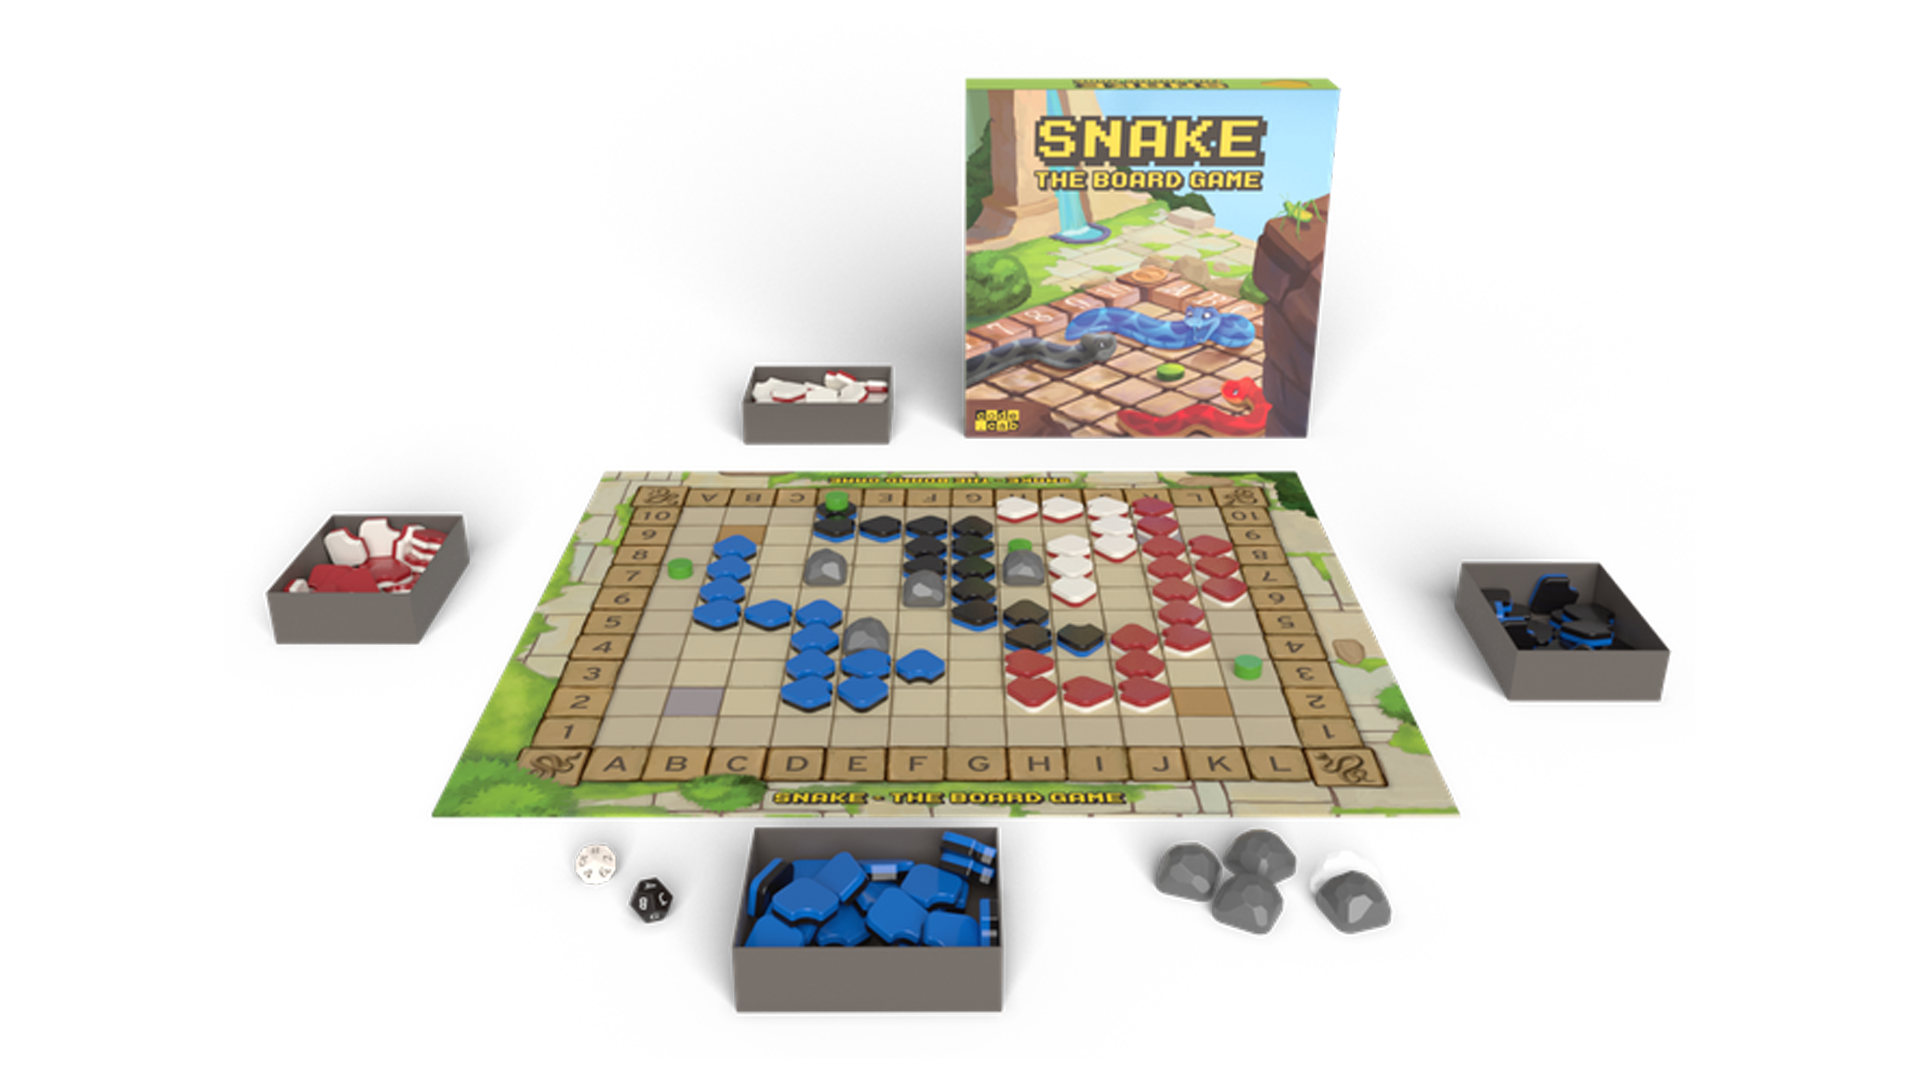 Snake: The Board Game layout